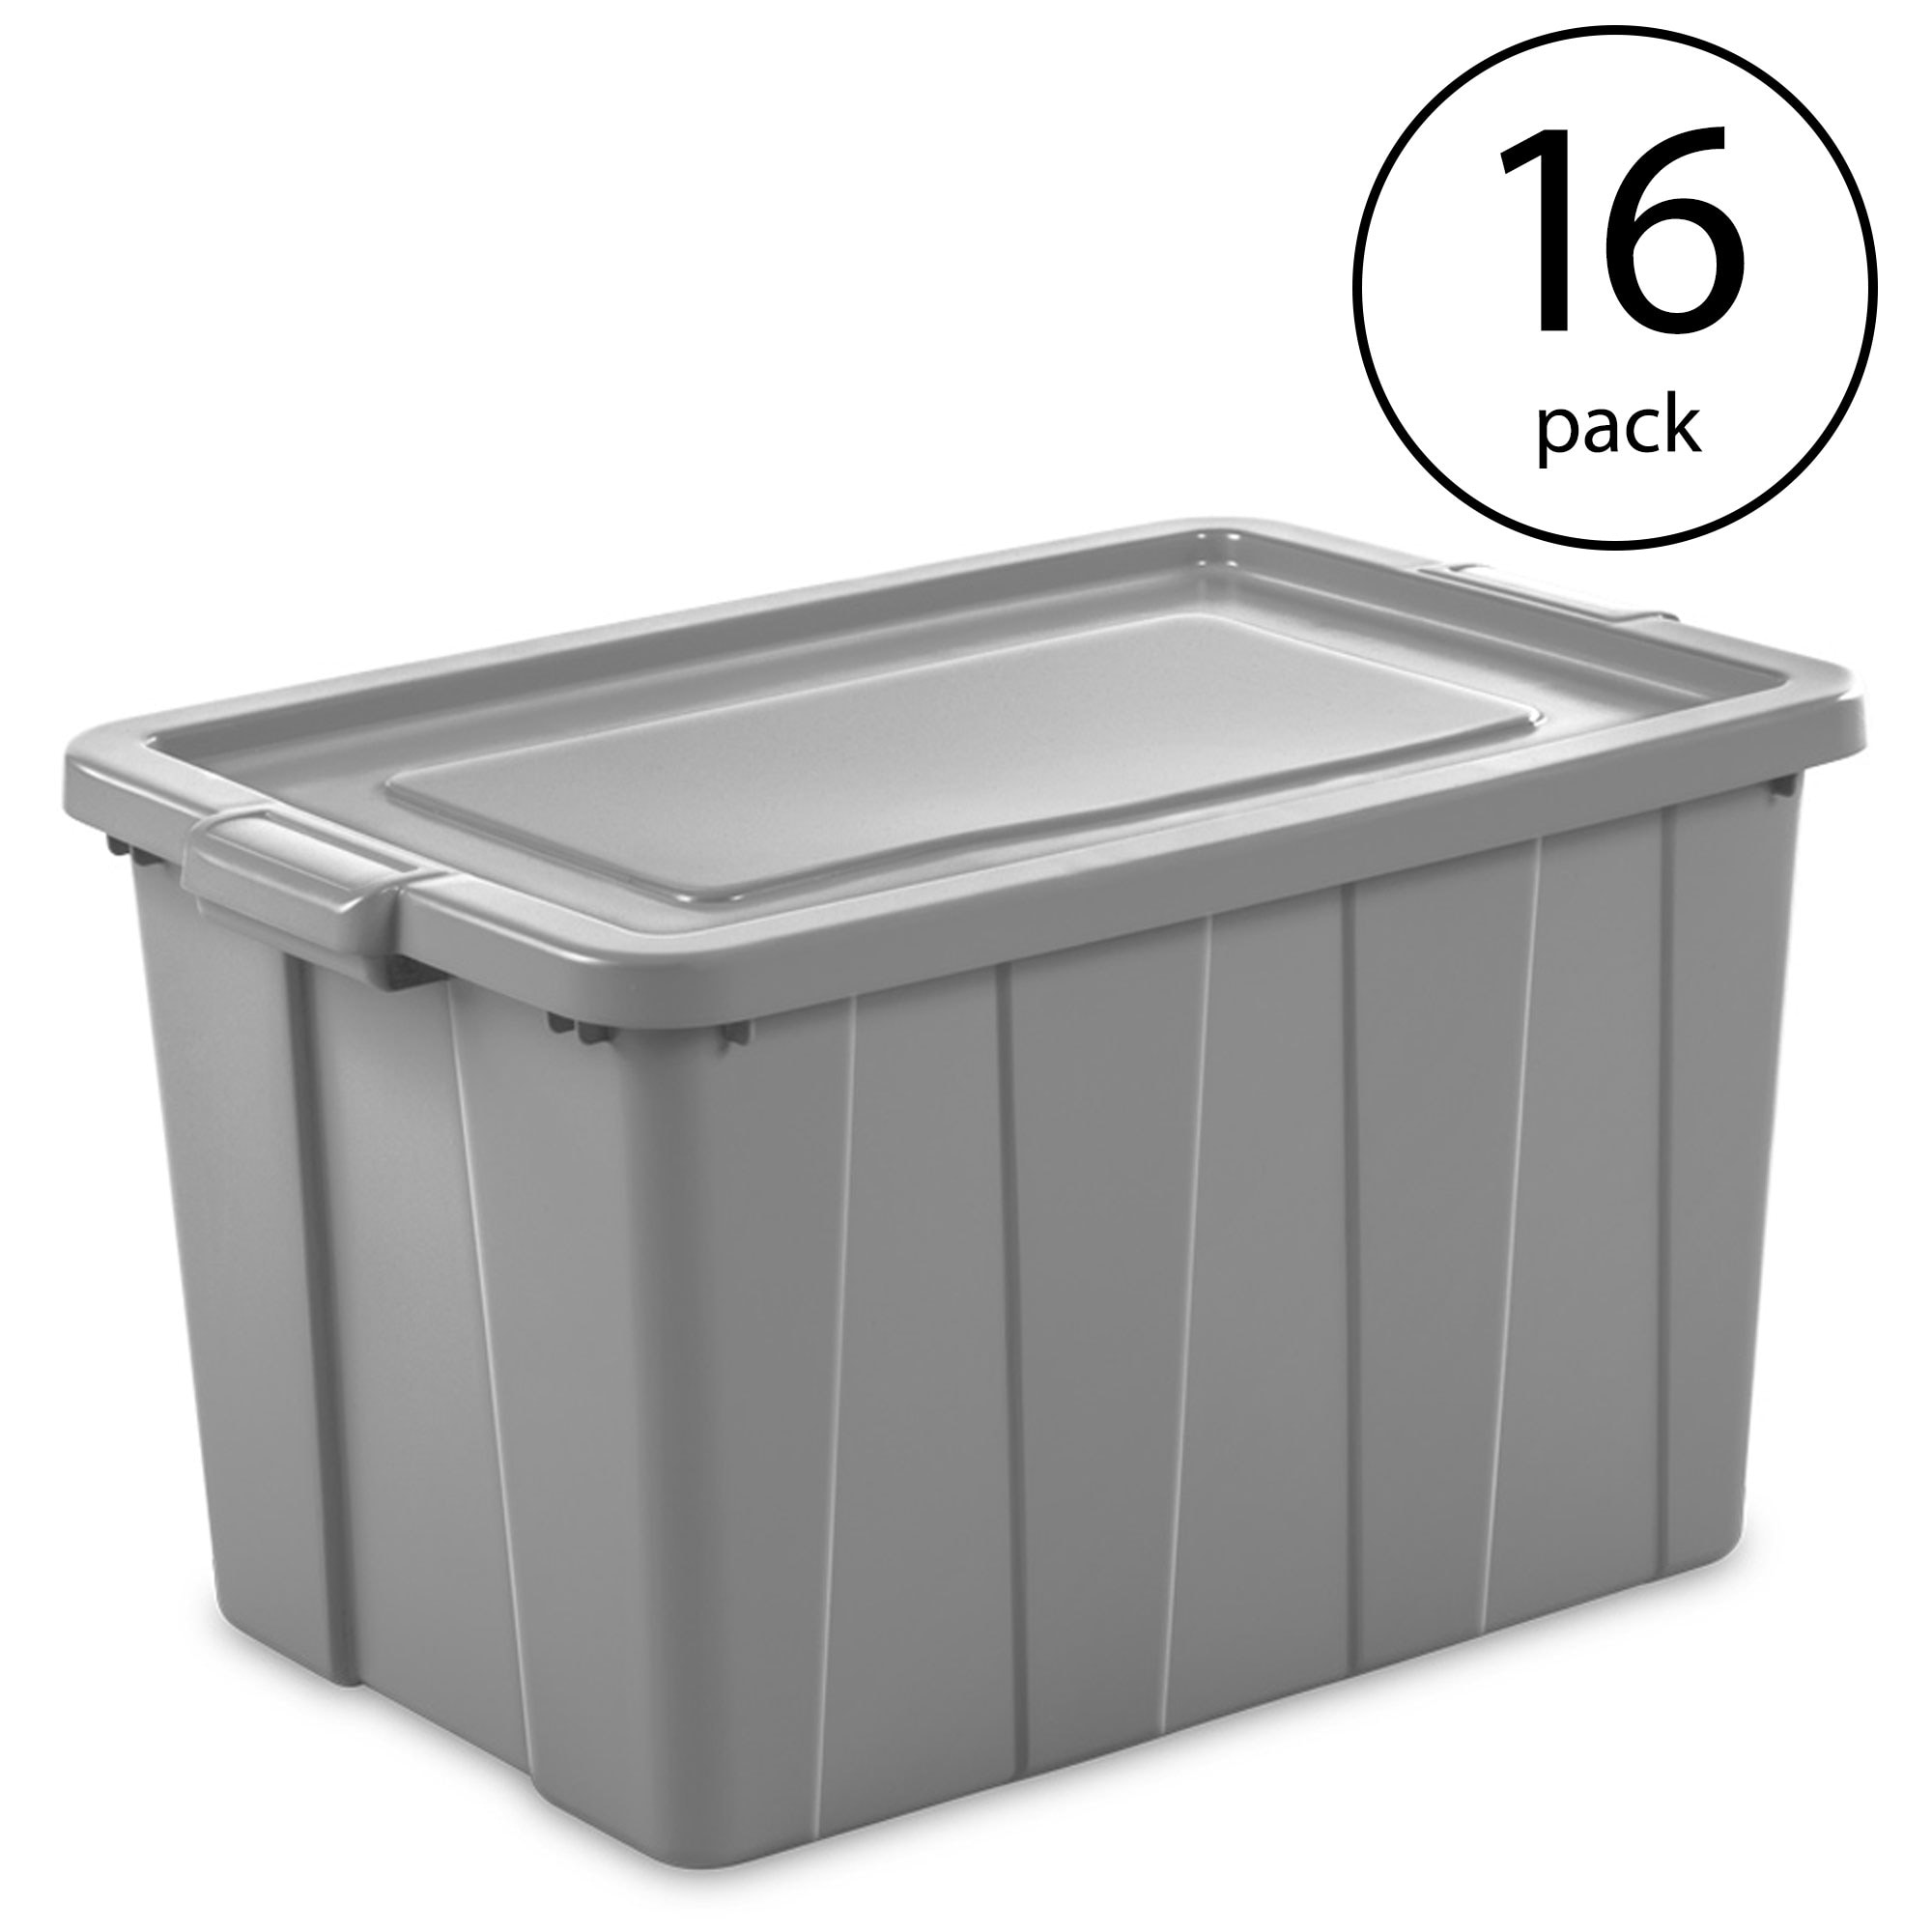 https://ak1.ostkcdn.com/images/products/is/images/direct/8f4c5e6c9e3ee0110b437657b19f9e44ff3f7dc9/Sterilite-Tuff1-30-Gallon-Plastic-Storage-Tote-Container-Bin-with-Lid-%2816-Pack%29.jpg